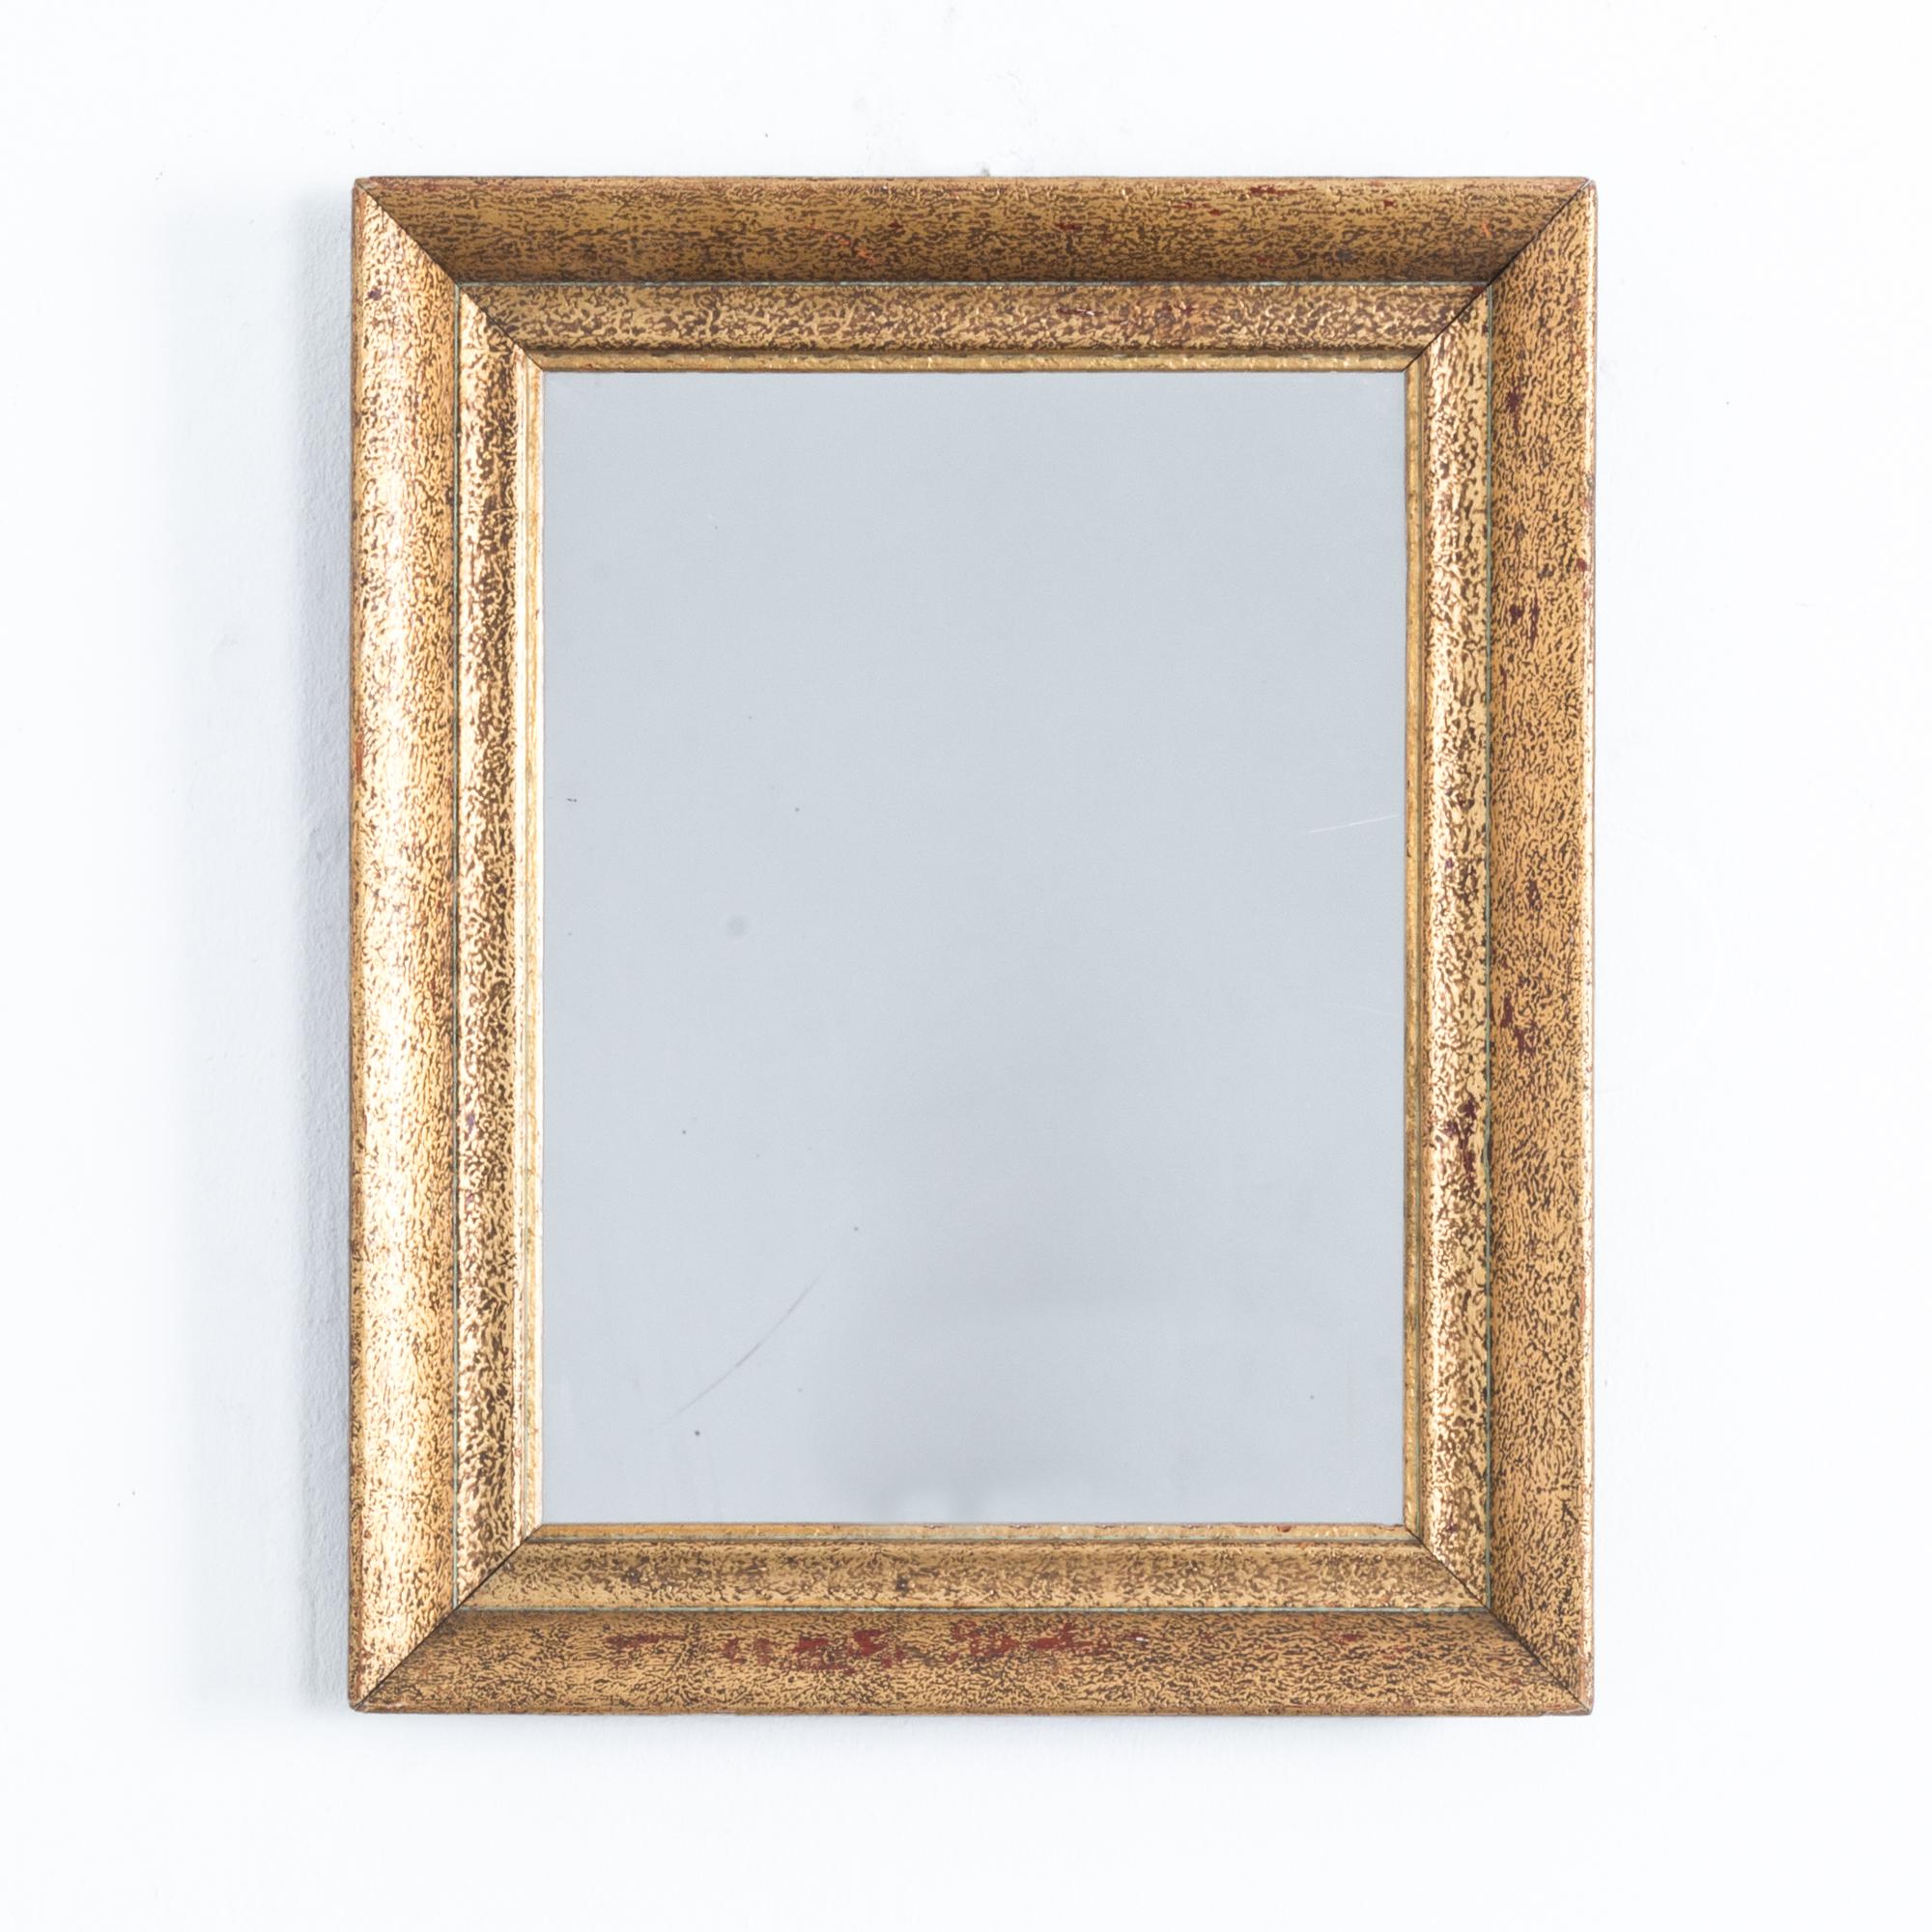 A mirror with a rectangular gilded frame from Belgium, circa 1930. A textured finish creates a patinated effect, revealing a coppery undercoat beneath the gold. The wide angles of the frame add depth to the reflection. Simple lines are enhanced by